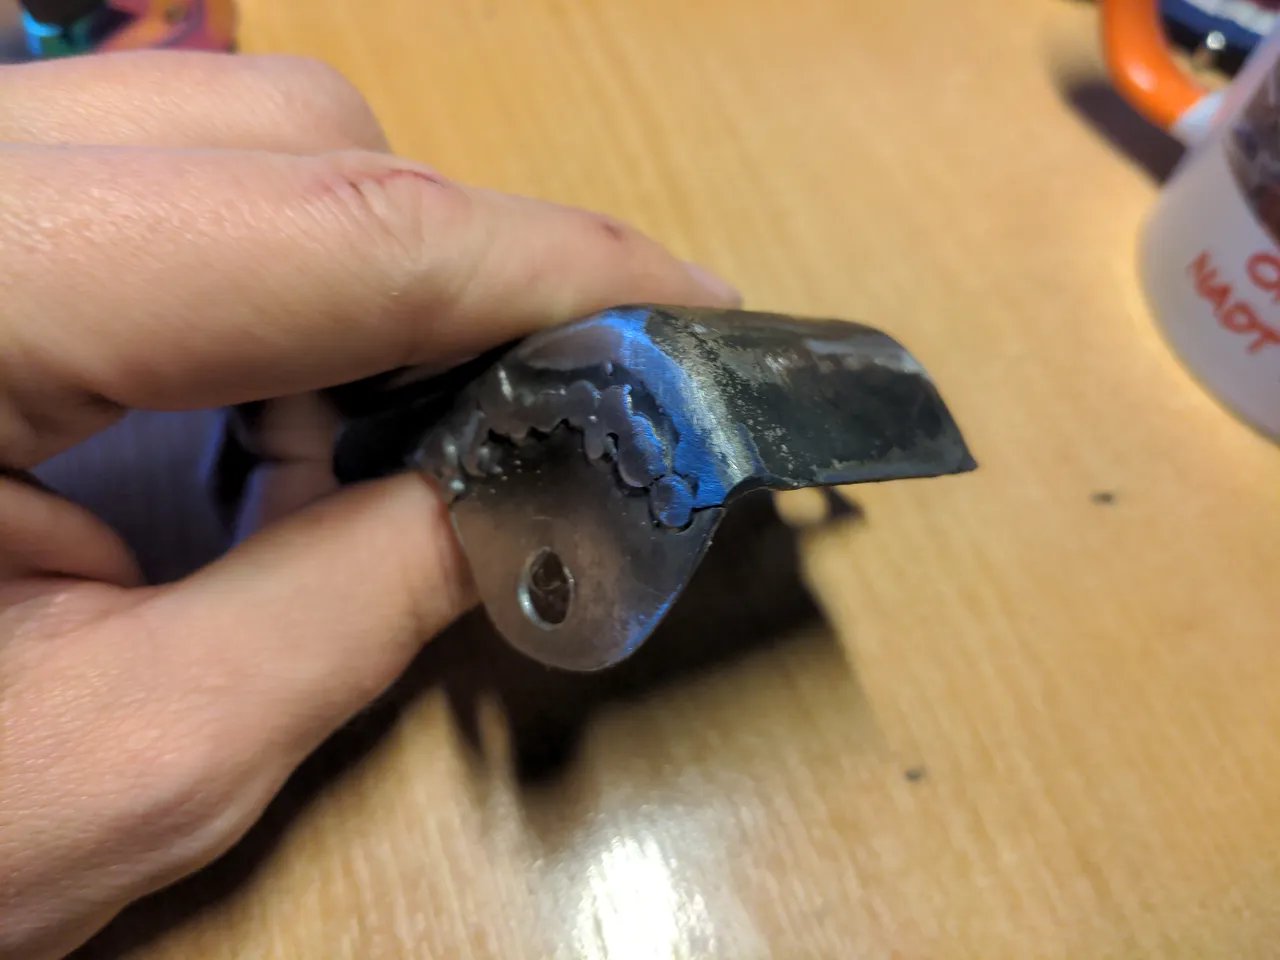 A wastegate actuator heat shield. It has a section cut out, and a new section welded in its place with a hole in it for a bolt.